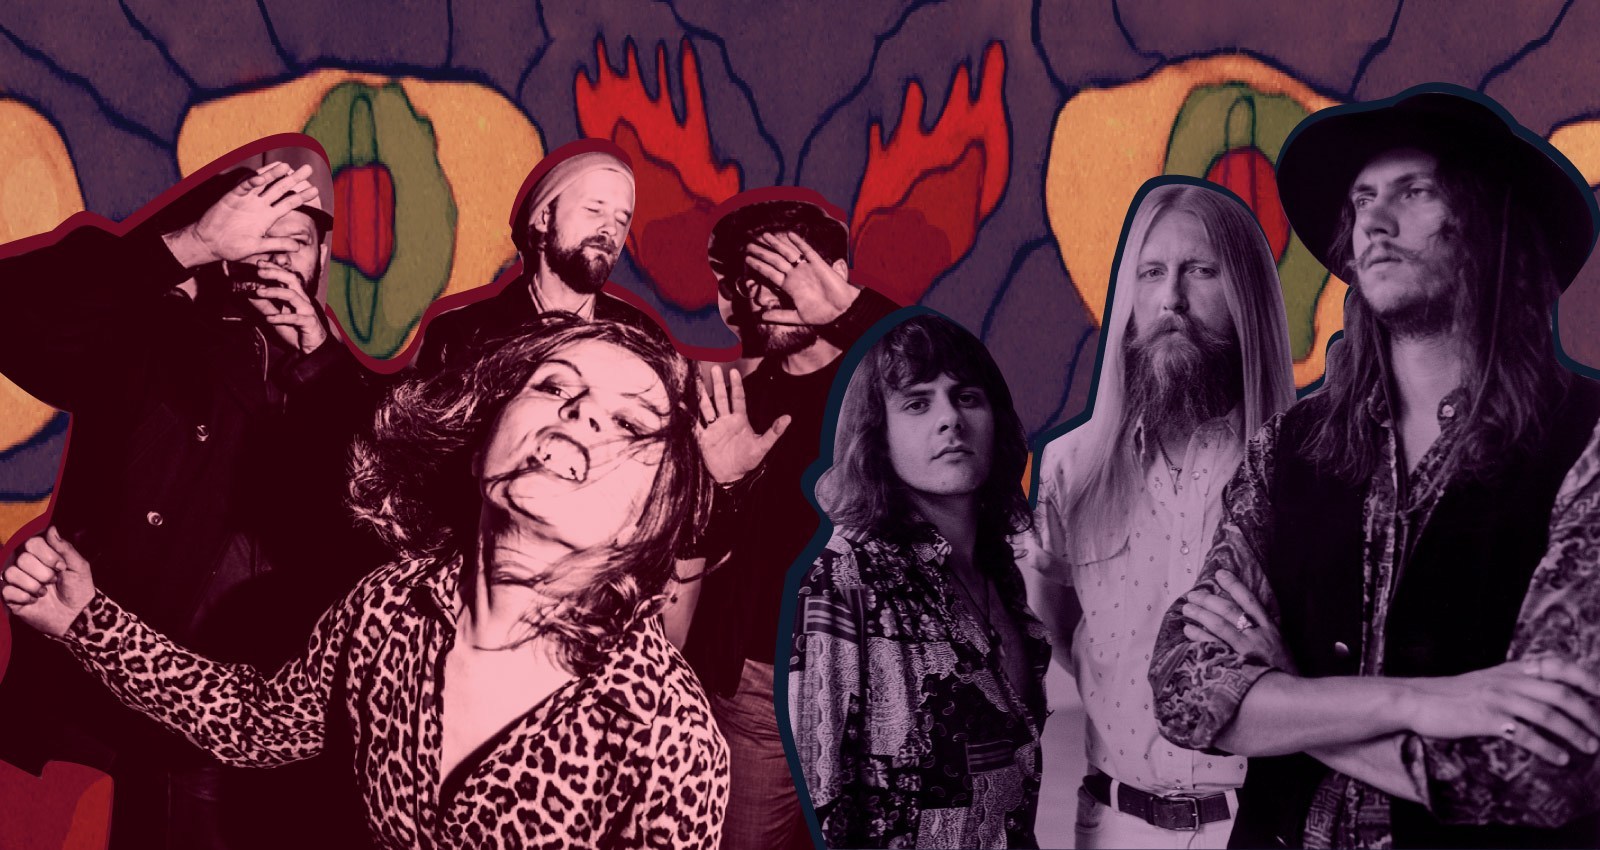 Heavy Psych And Stoner Rock Bands Find An Unlikely Hotbed In Poland Bandcamp Daily